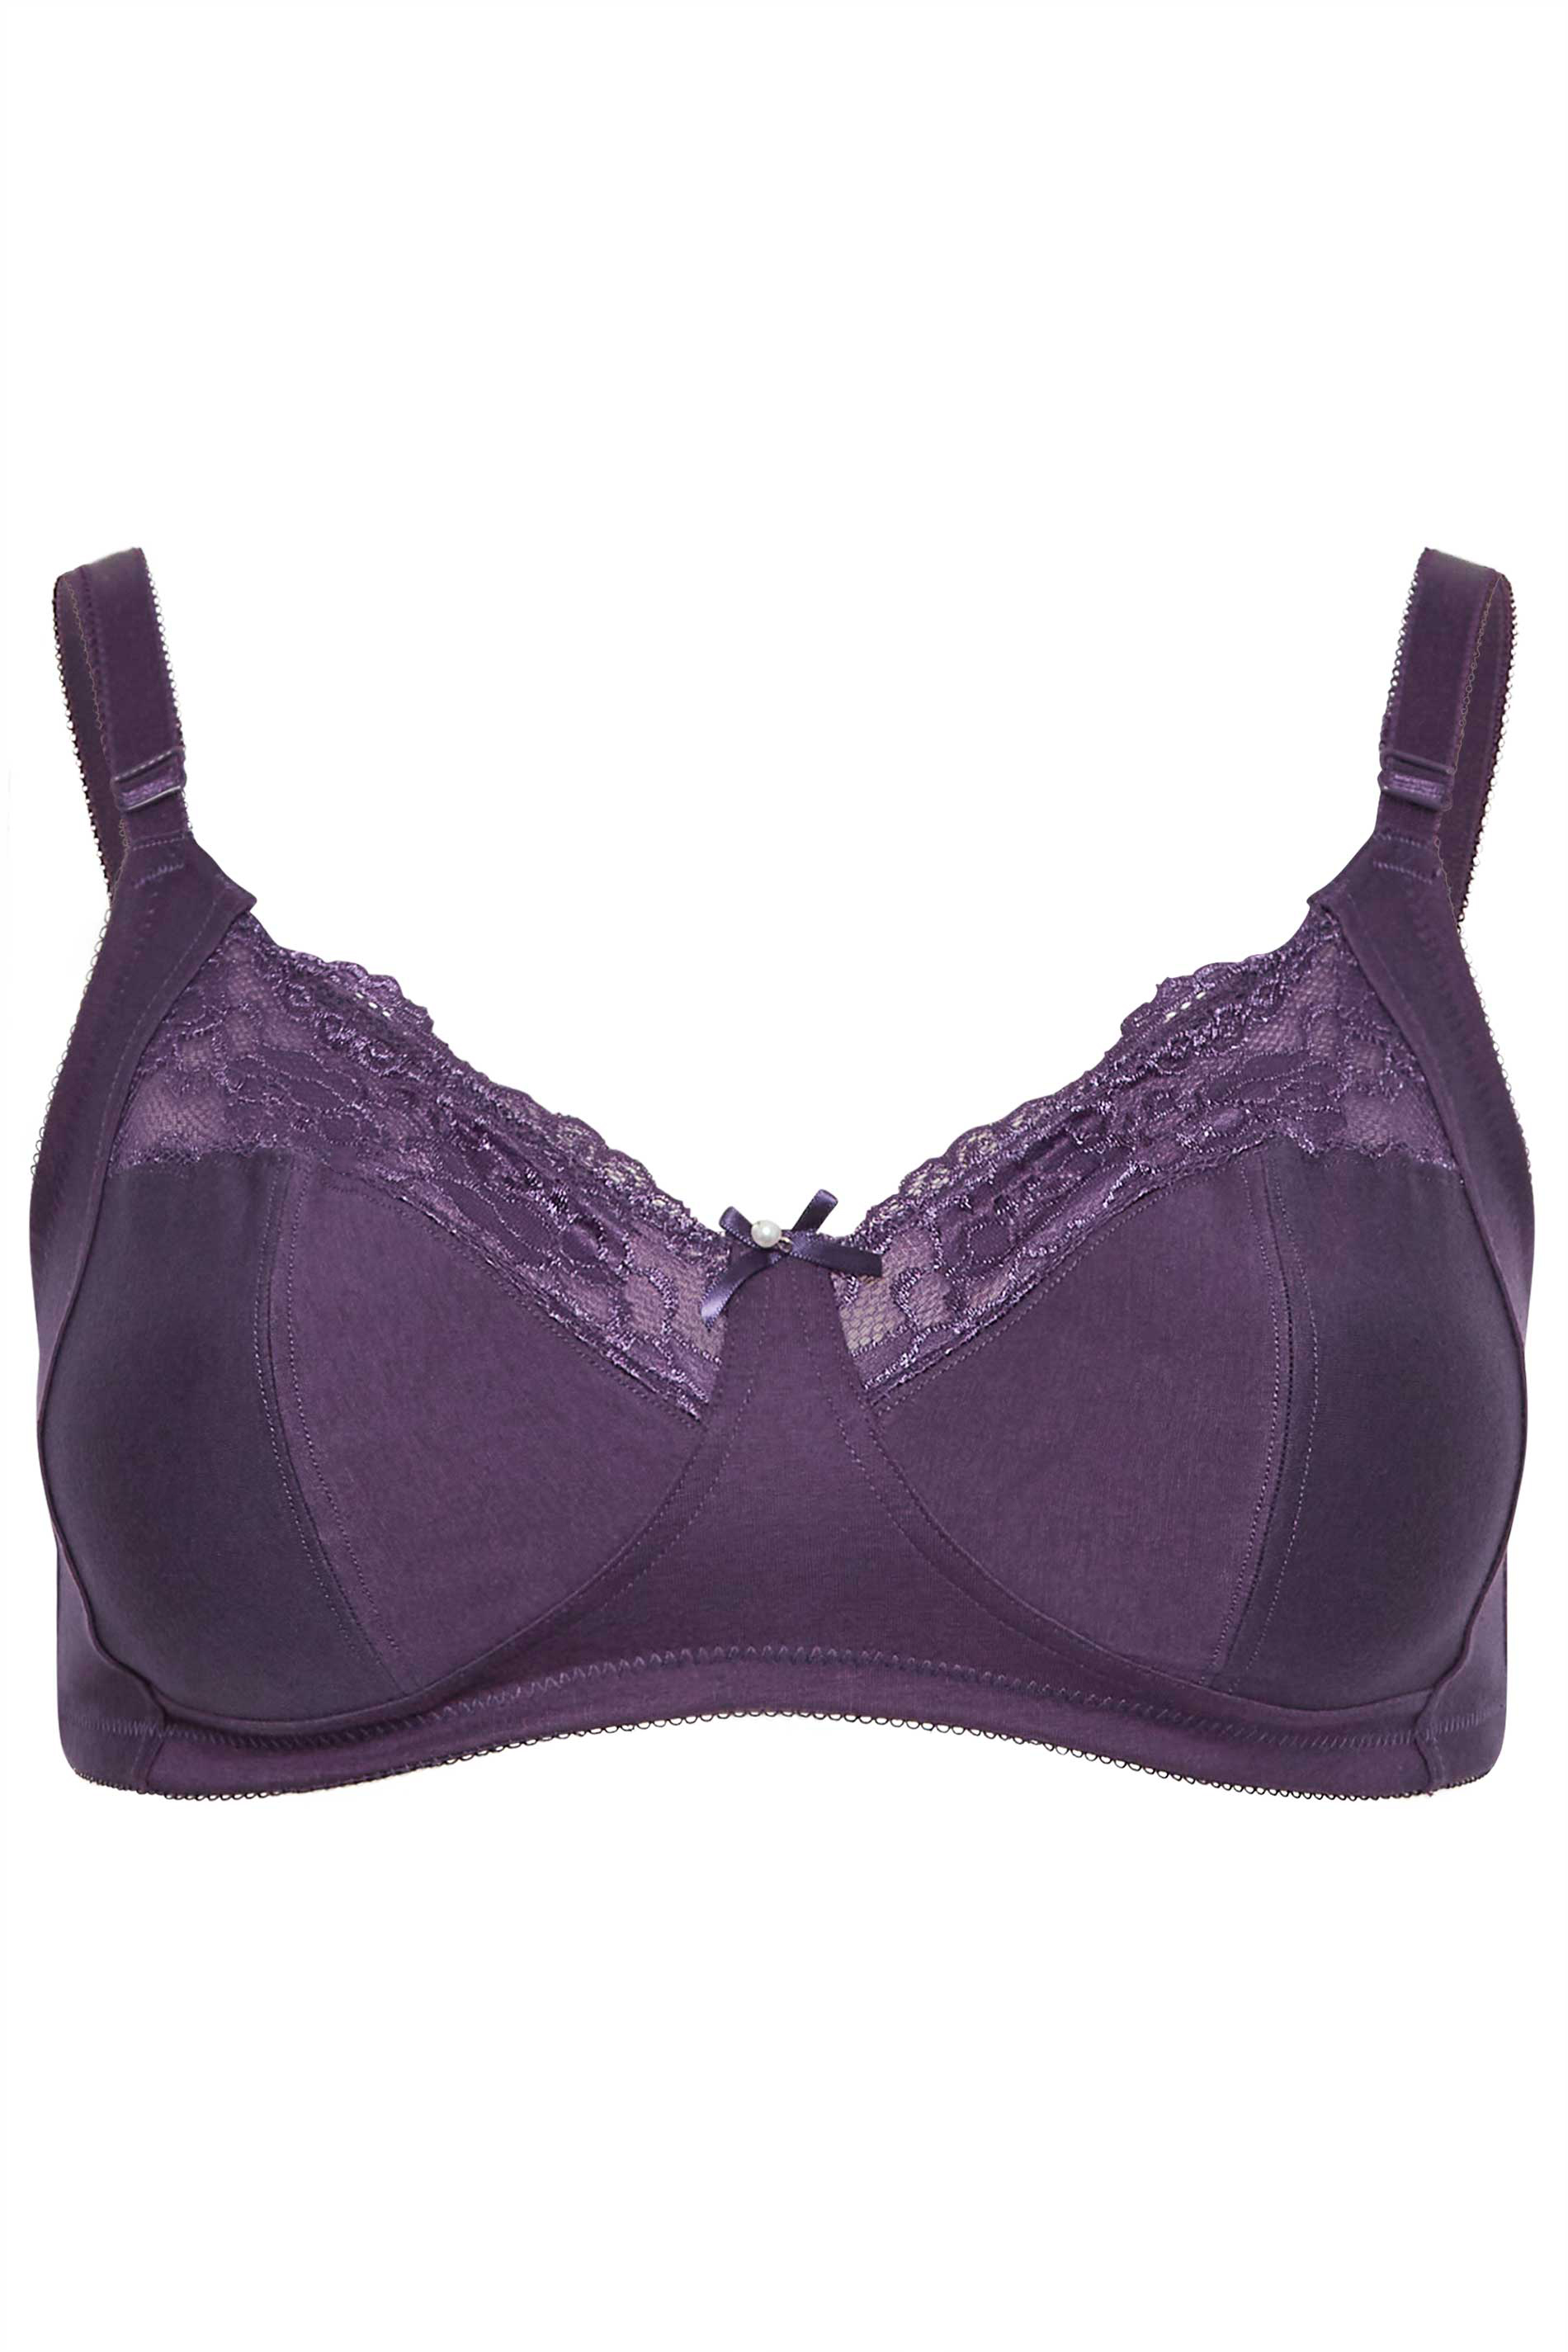 YOURS 2 PACK Black & Purple Cotton Lace Trim Non-Padded Bras